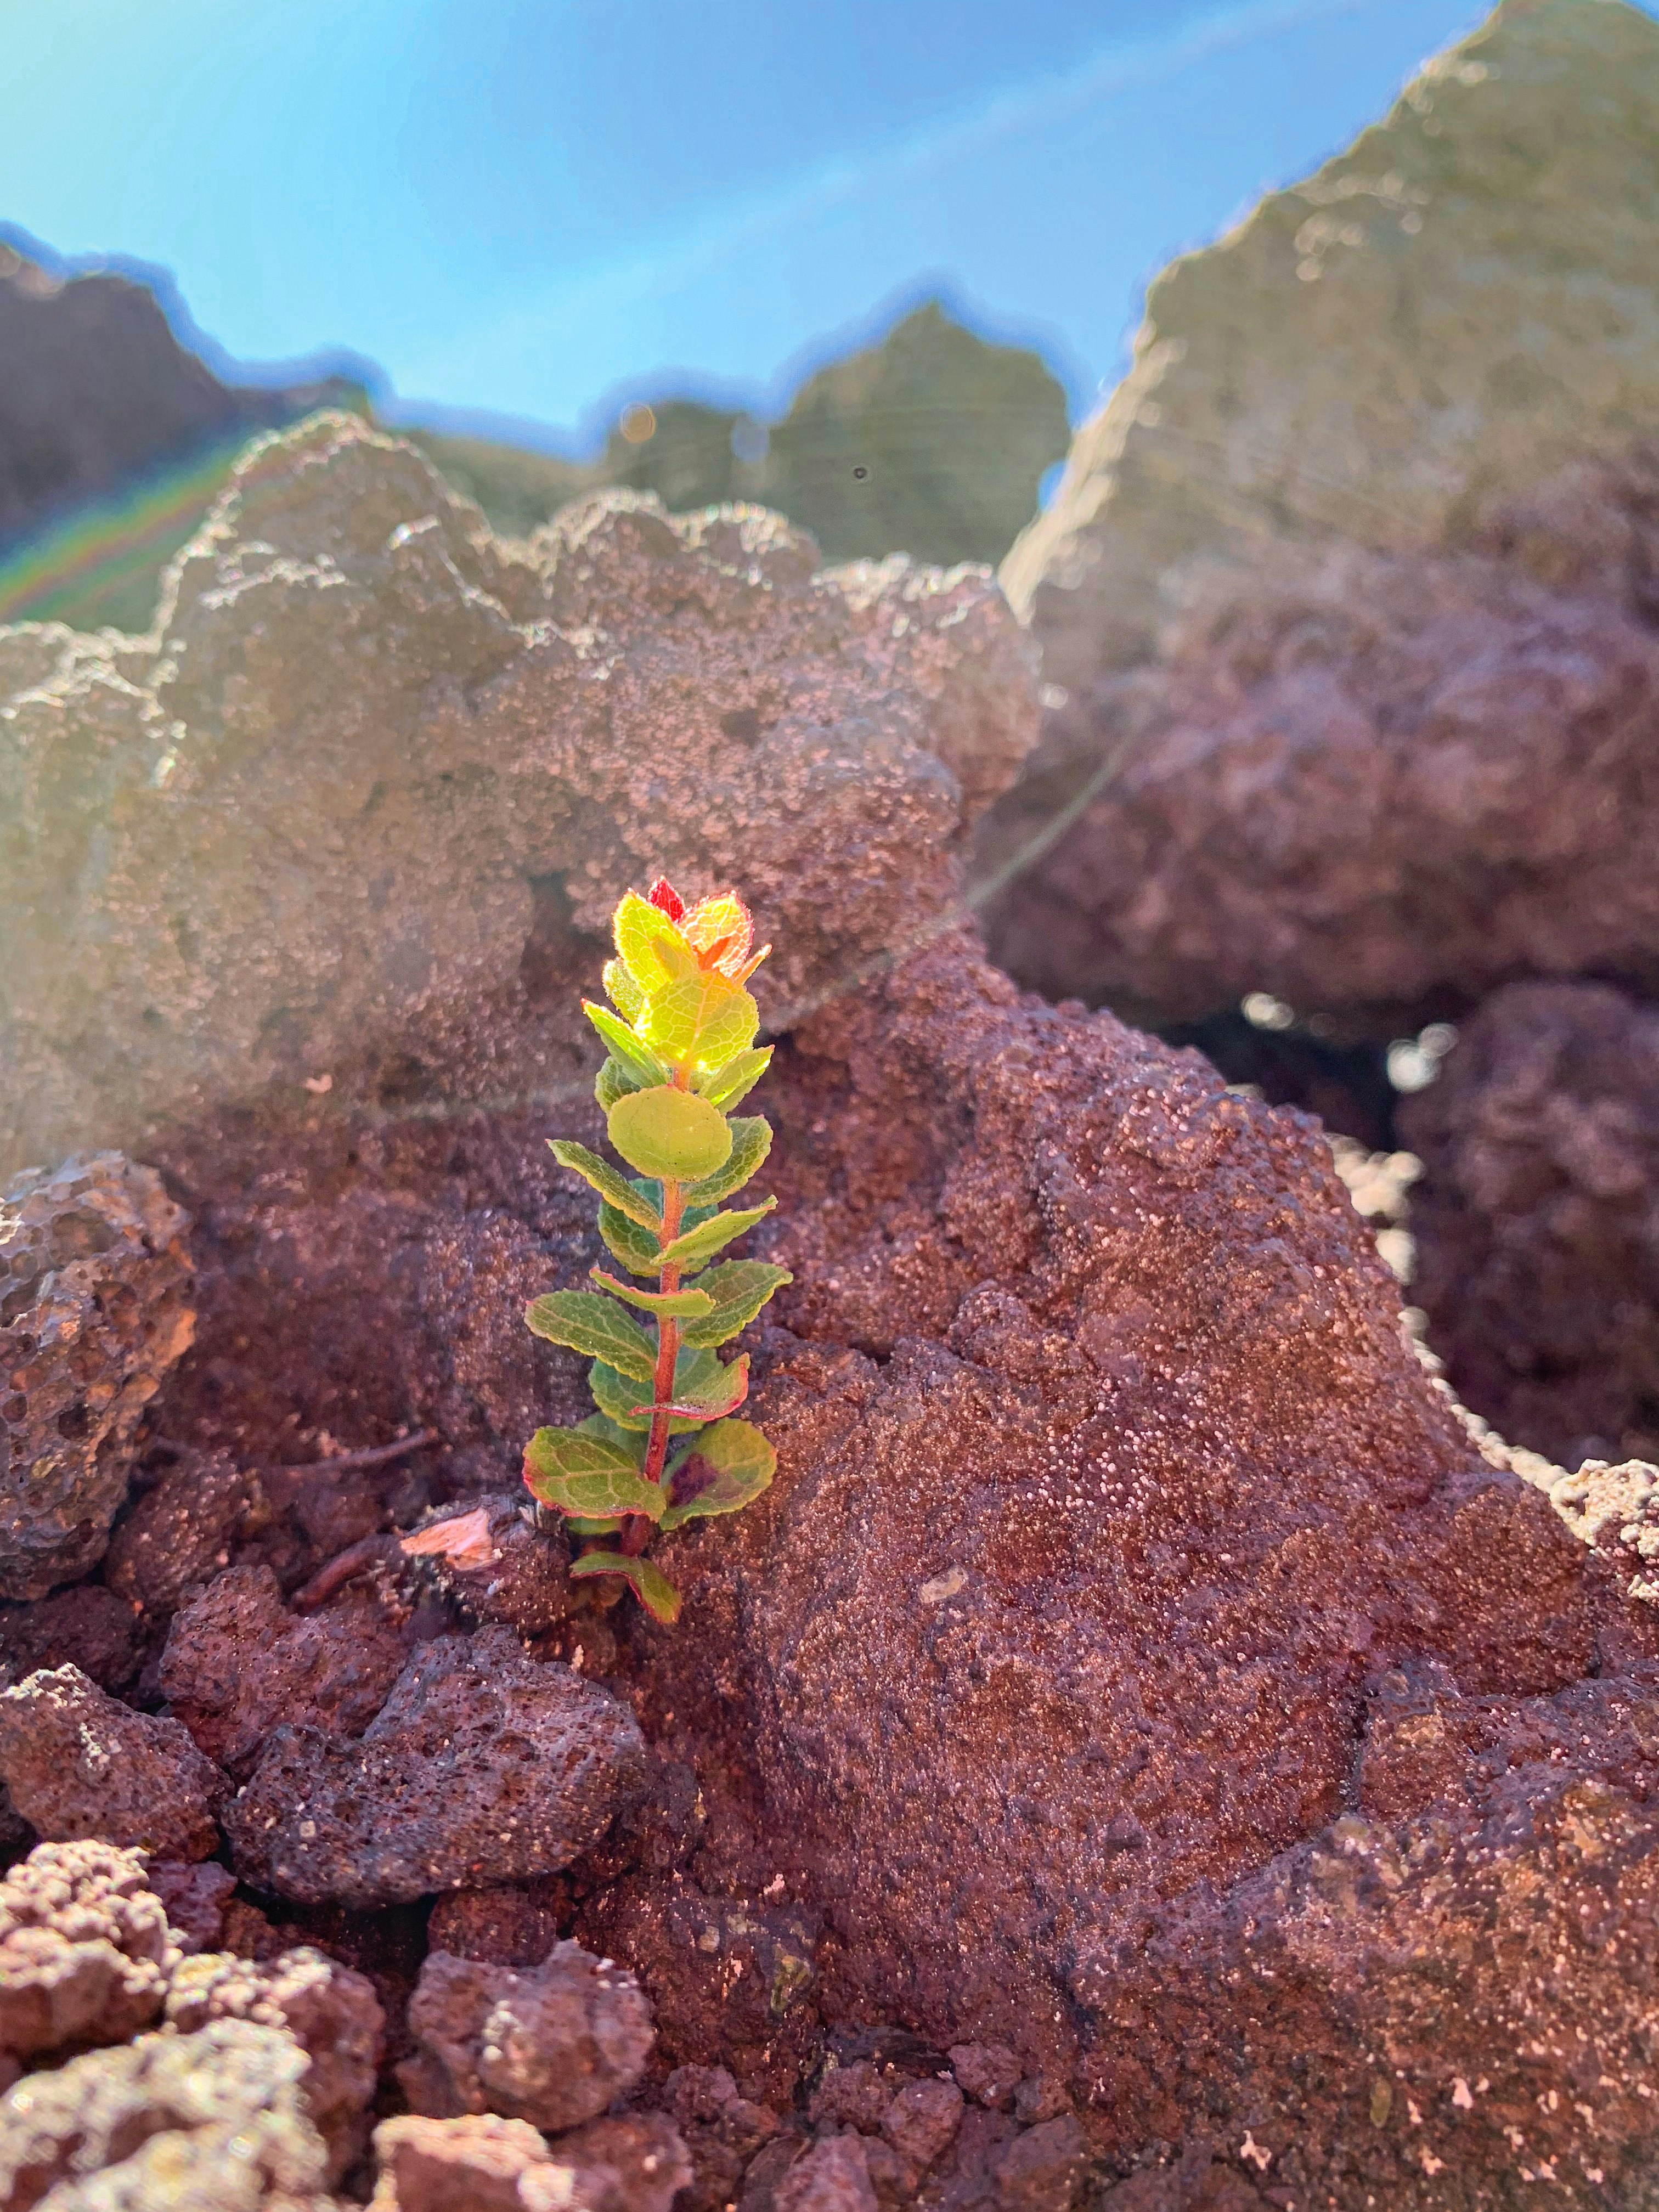 A close-up of a small plant growing from a lump of volcanic rock in Volcanoes National Park